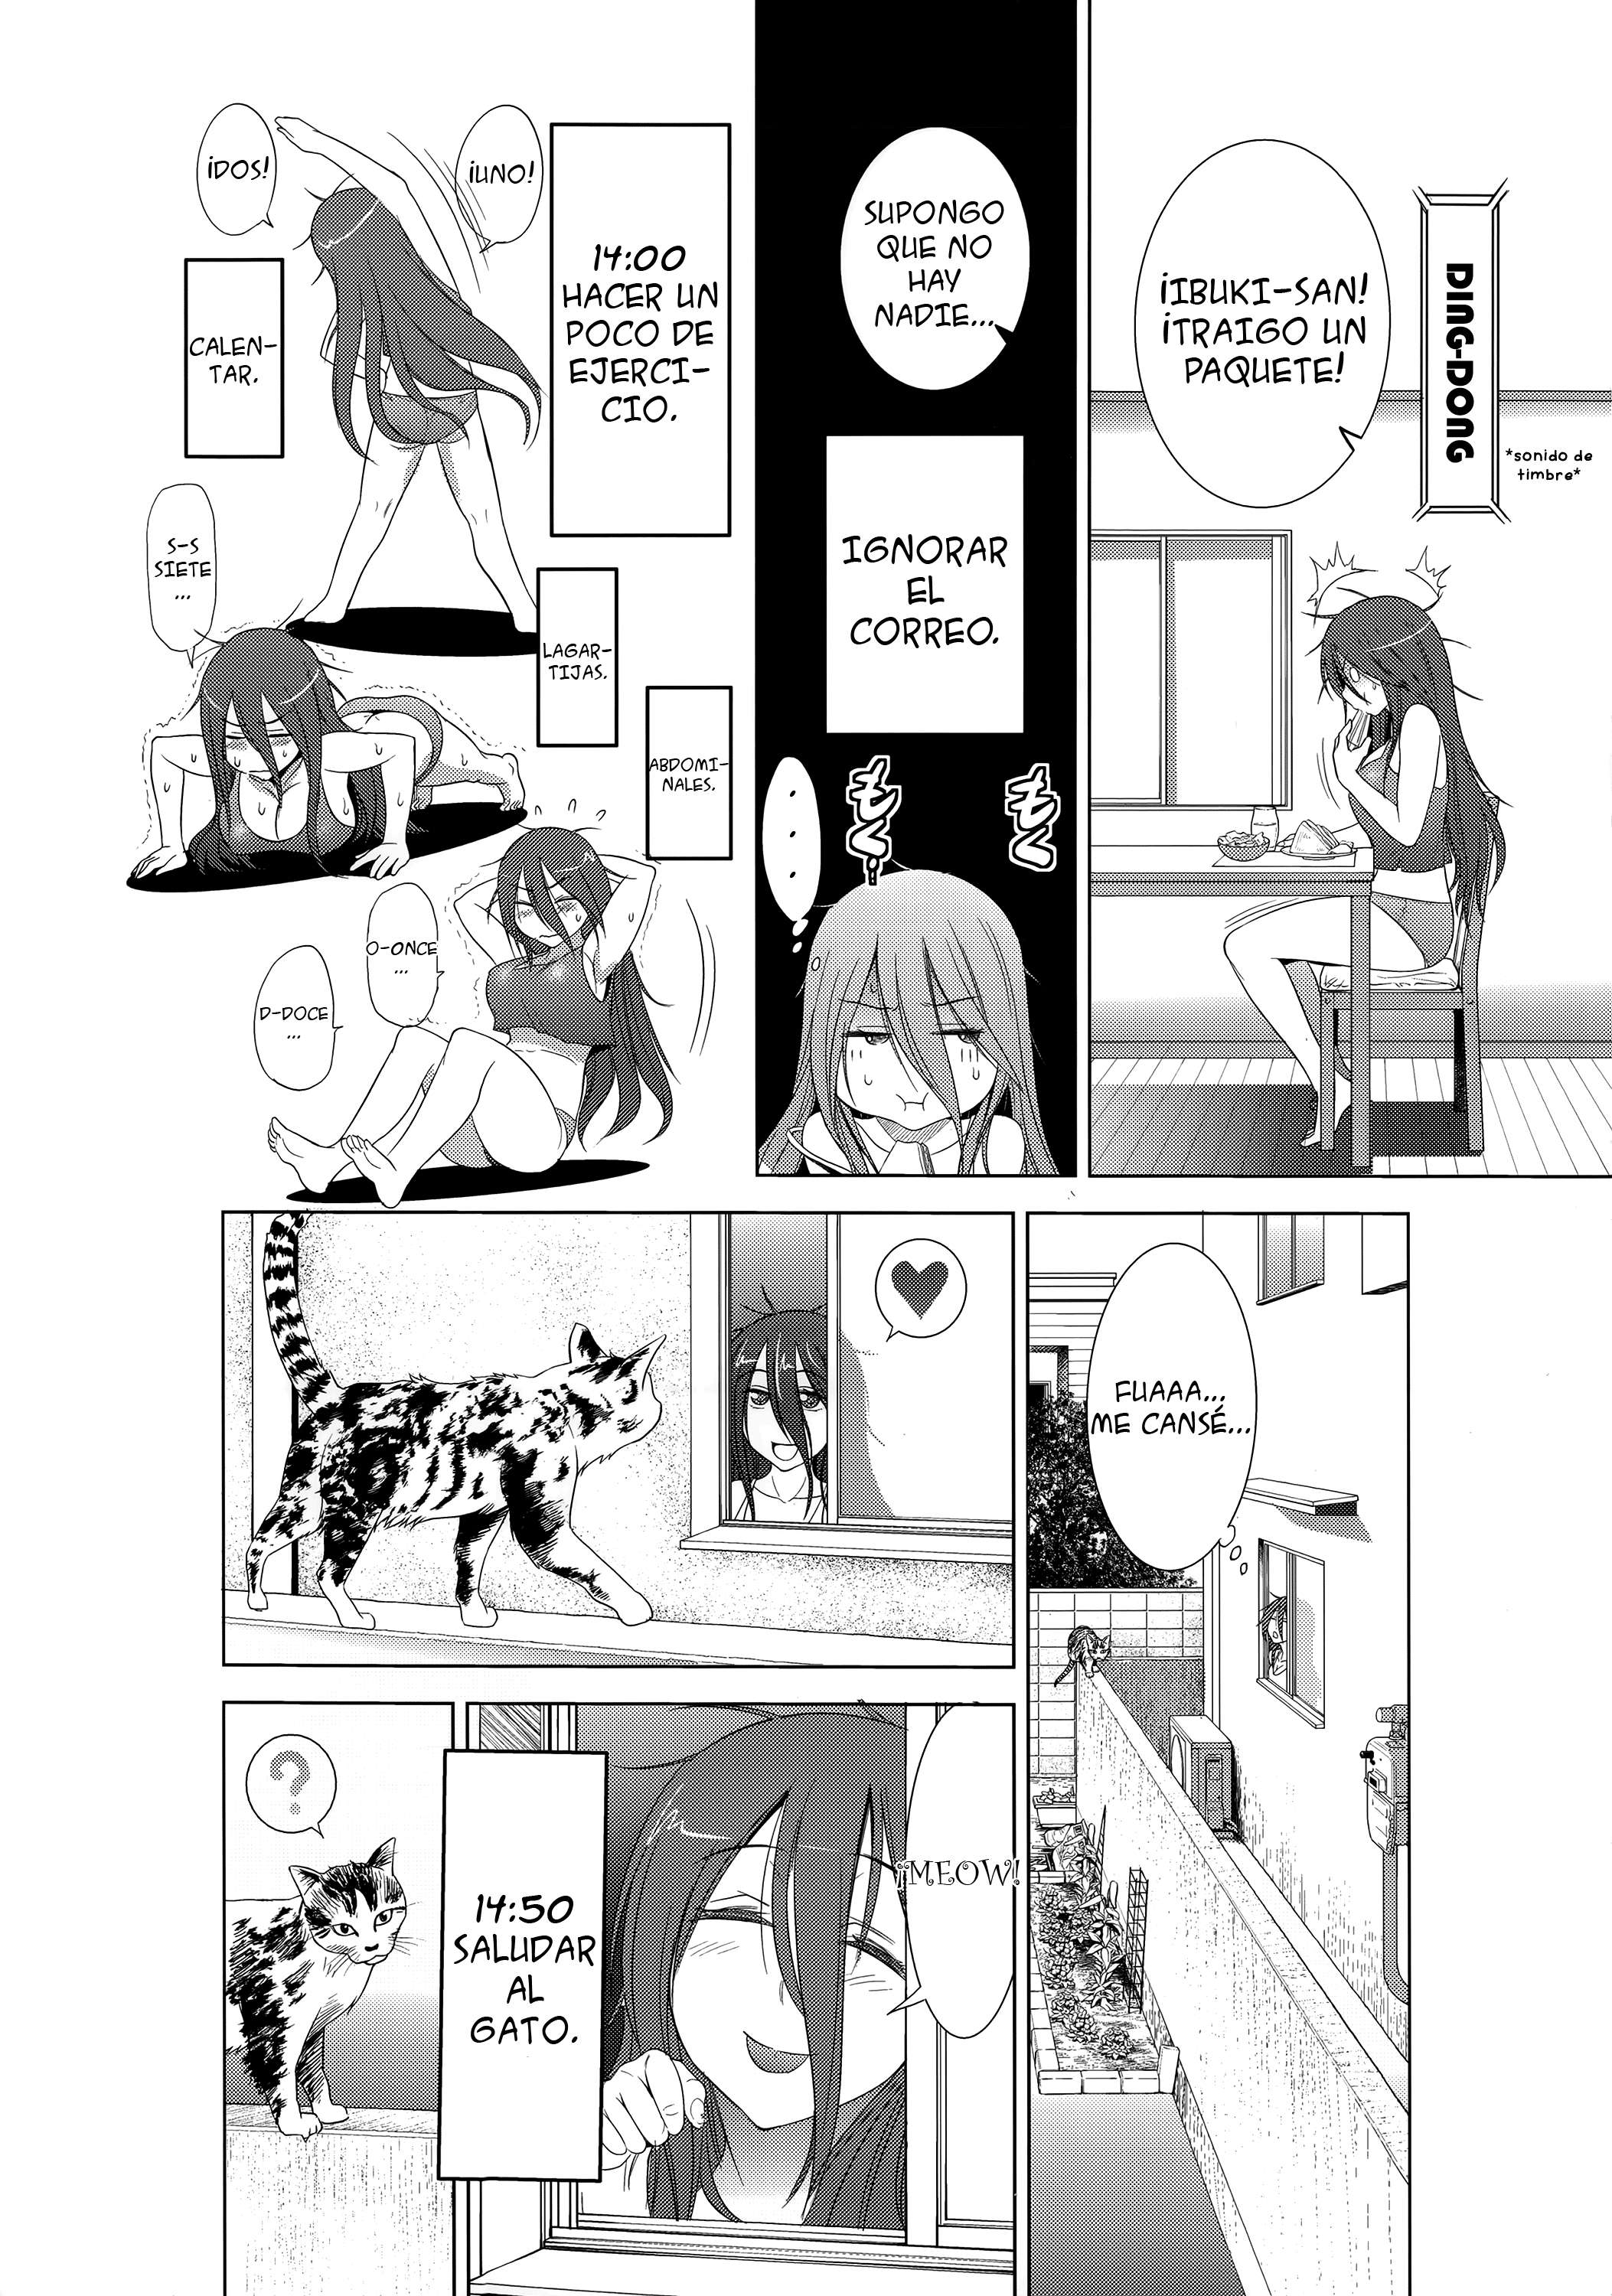 A Day with Koko-nee Chapter-1 - 1